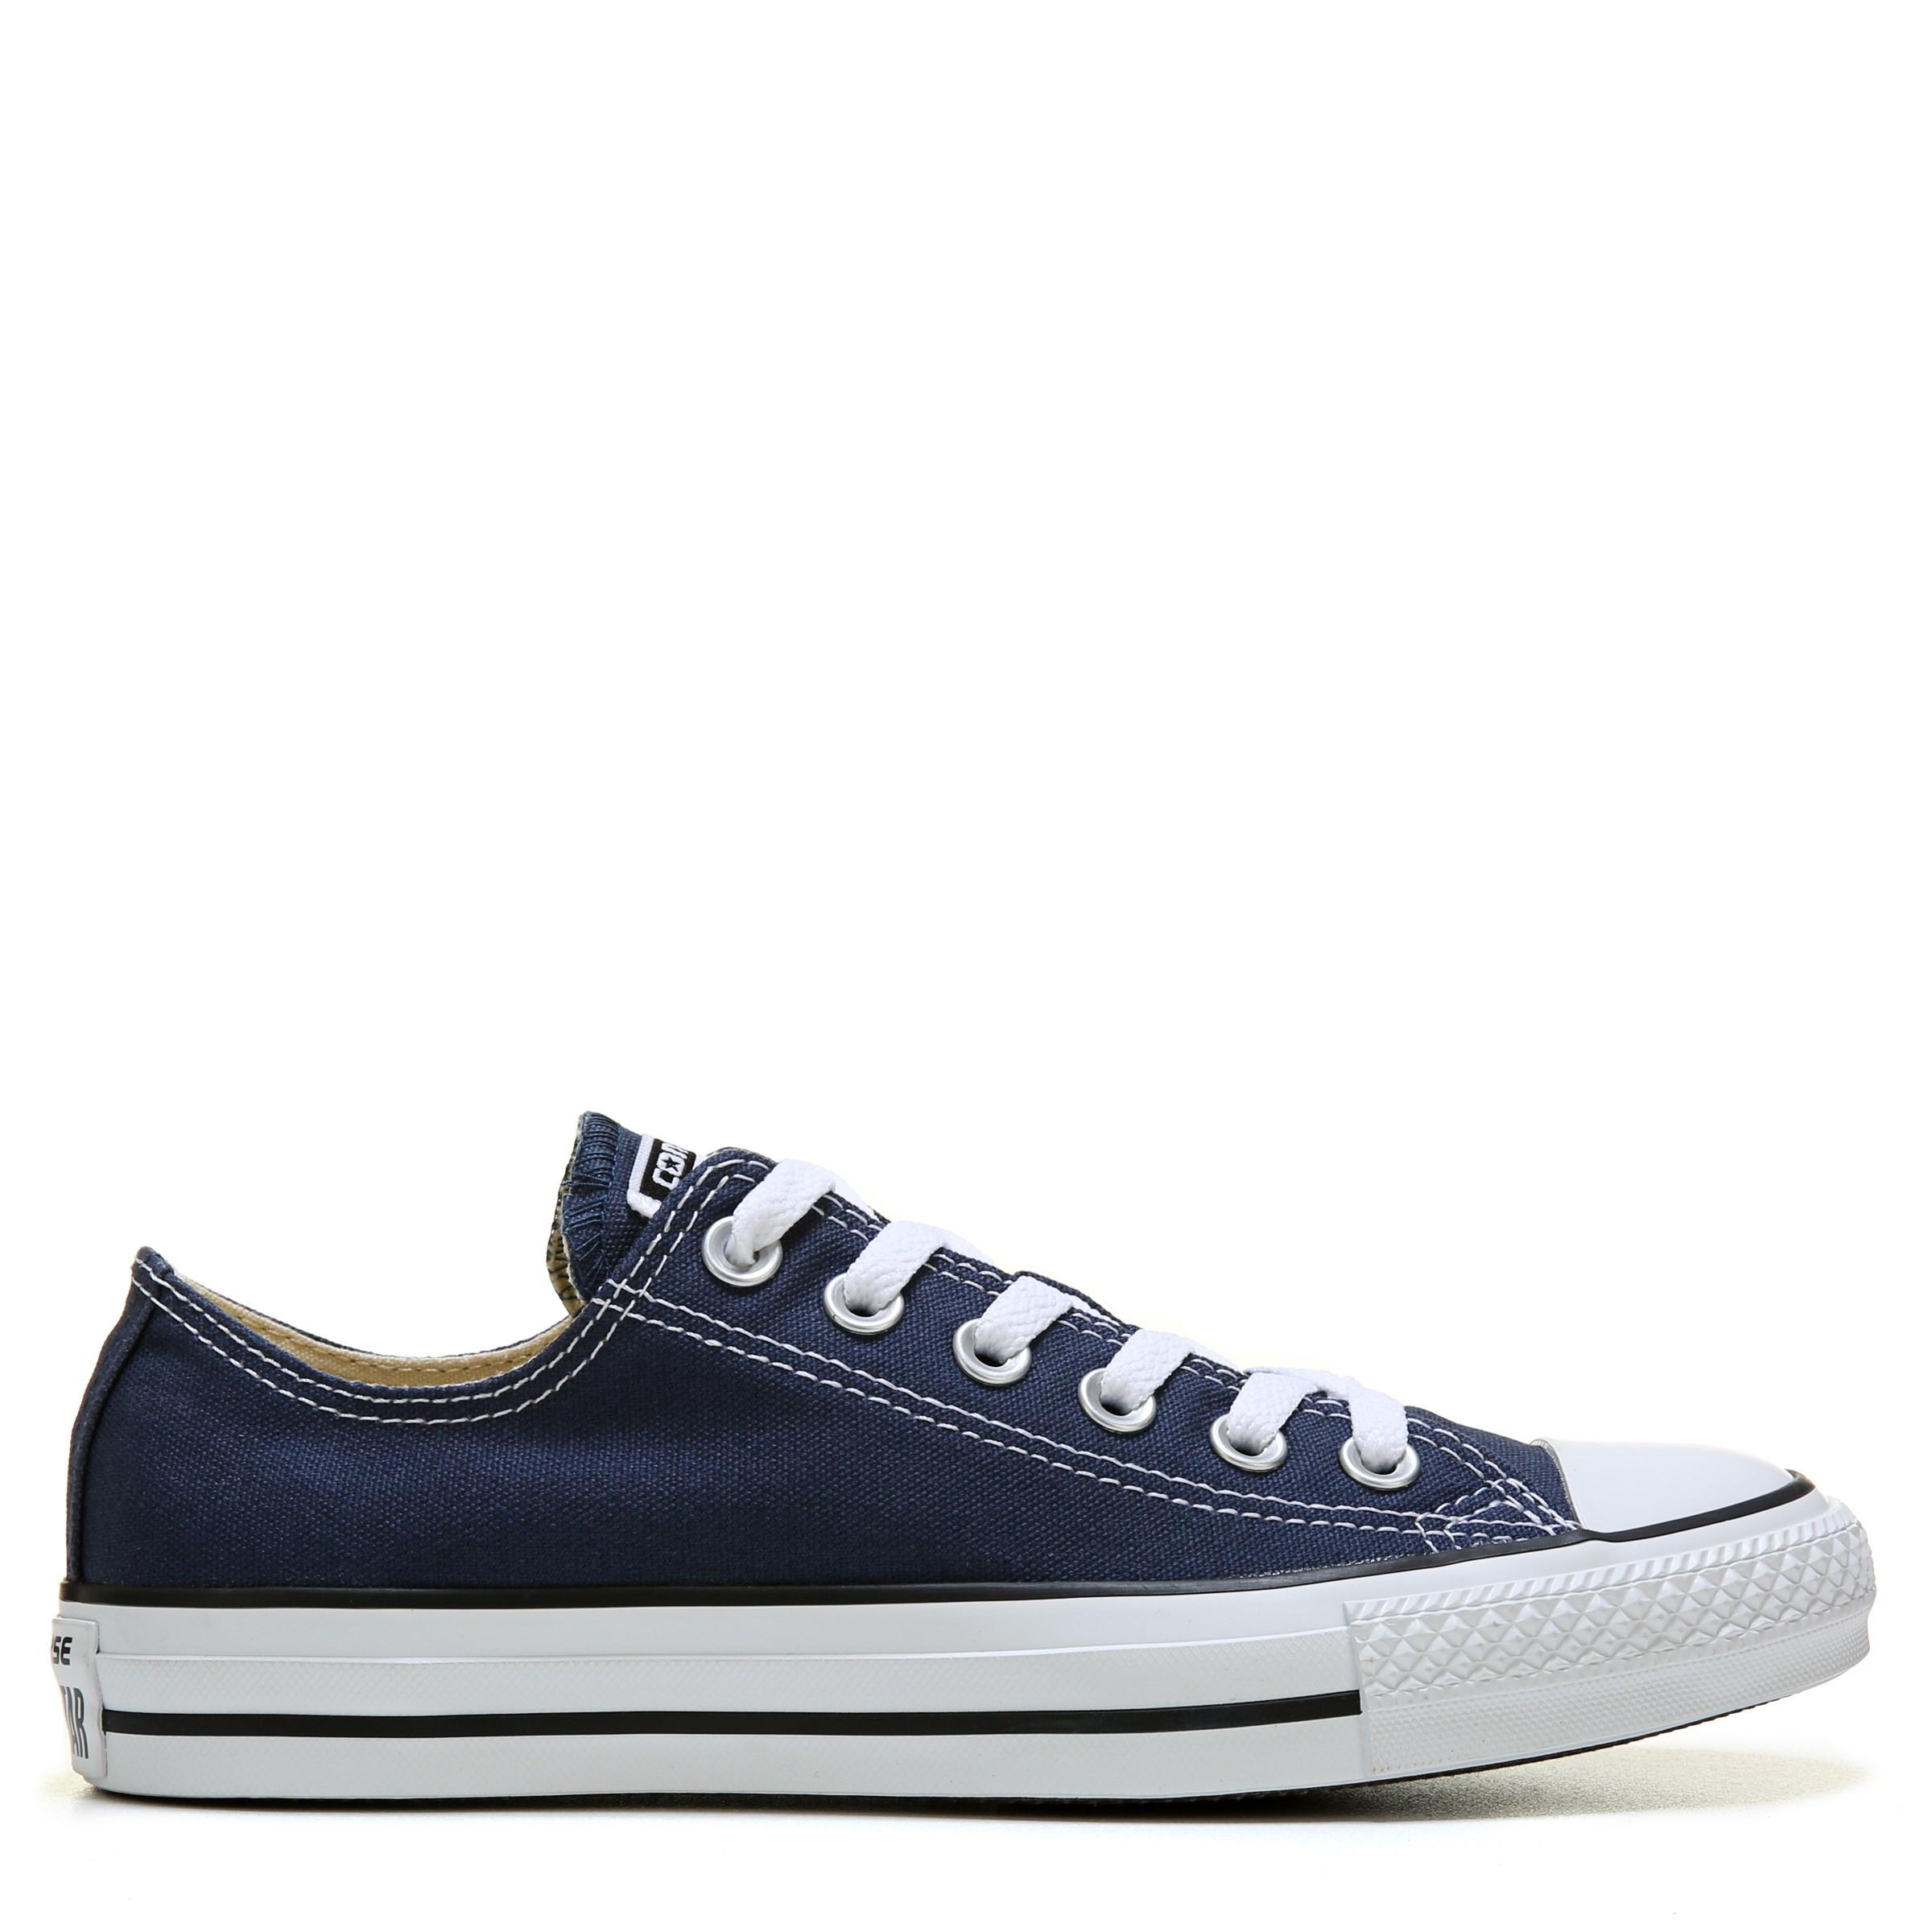 Converse Canvas Chuck Taylor All Star Low Top Sneakers in Navy (Blue ...